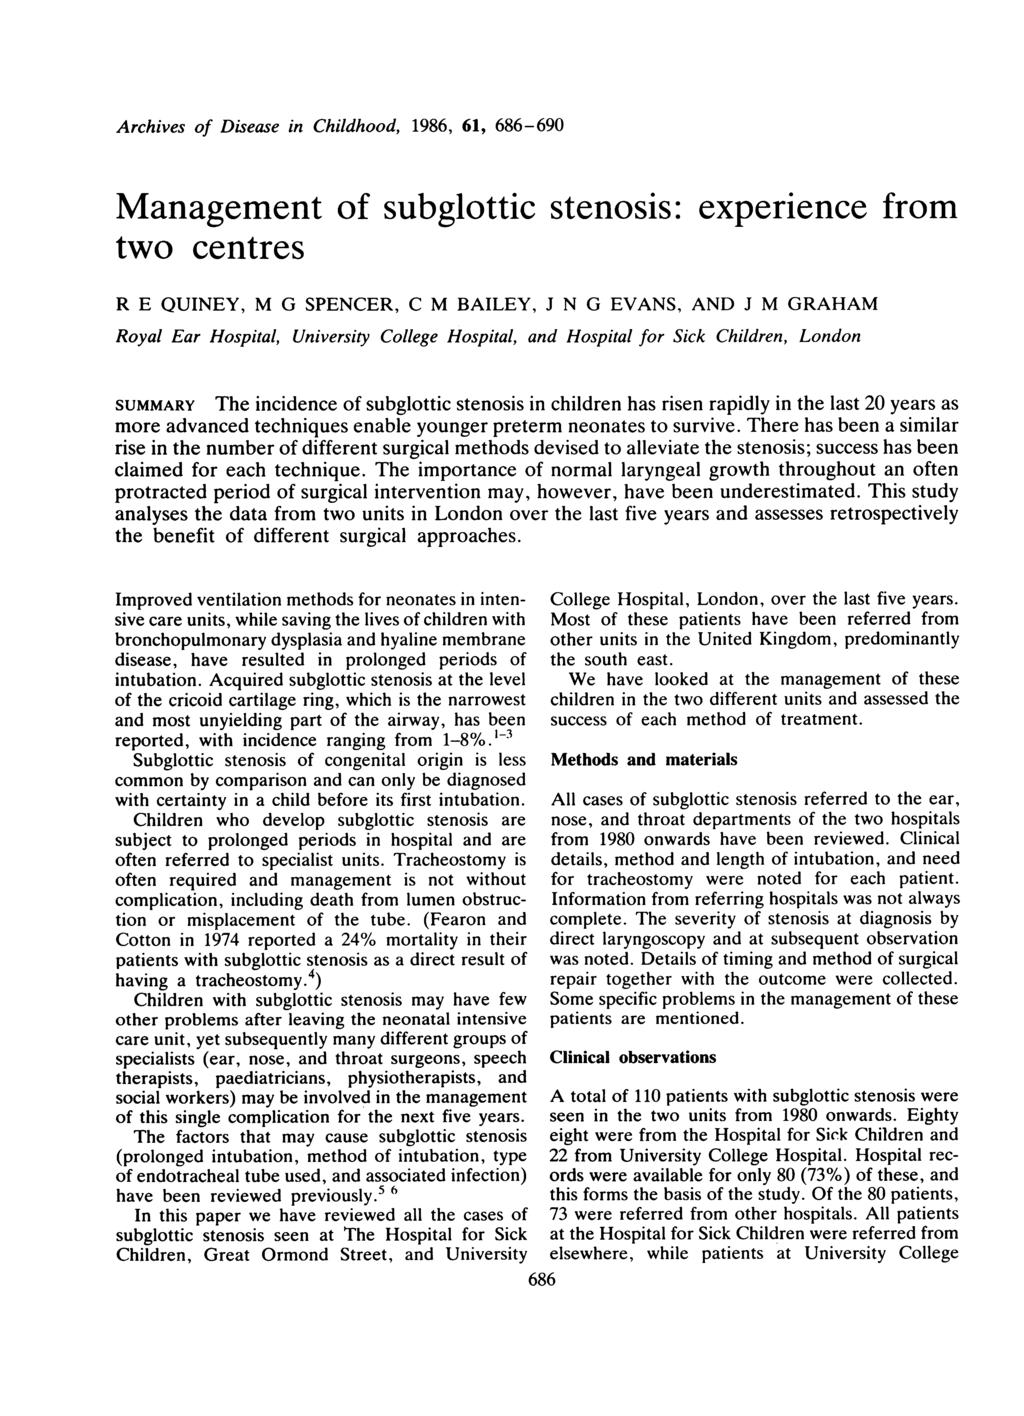 Archives of Disease in Childhood, 1986, 61, 686-690 Management of subglottic stenosis: two centres experience from R E QUINEY, M G SPENCER, C M BAILEY, J N G EVANS, AND J M GRAHAM Royal Ear Hospital,